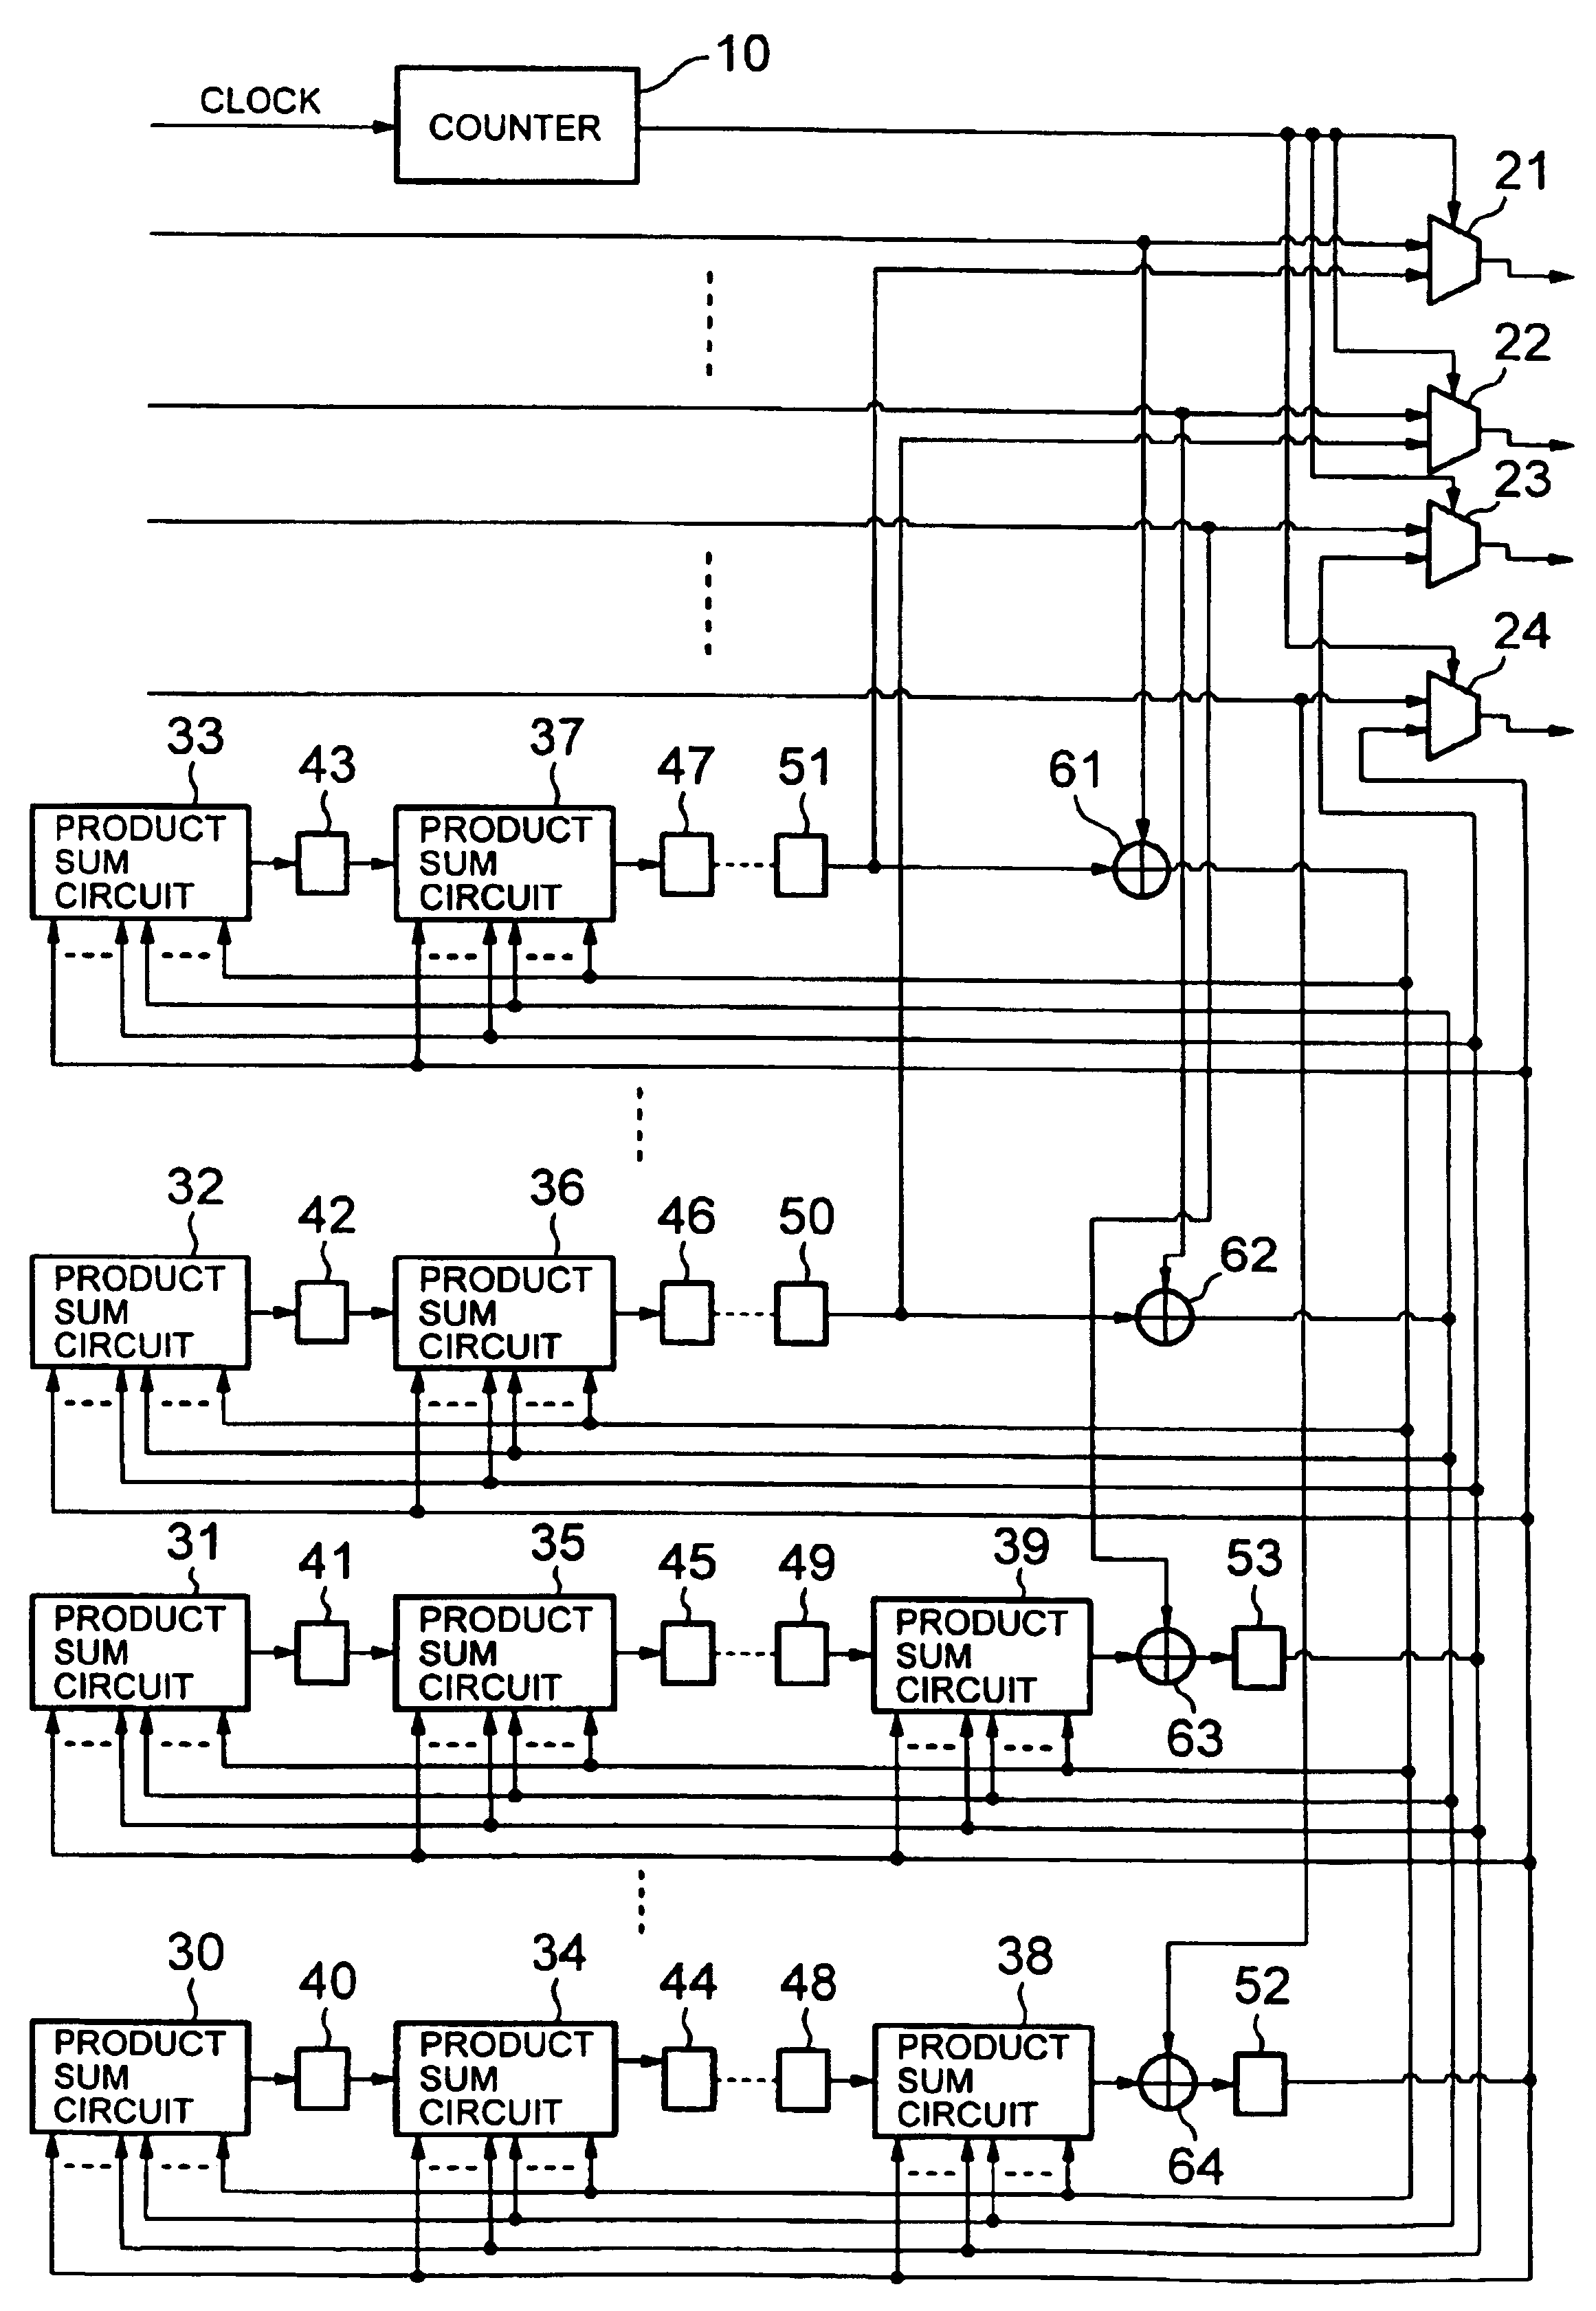 Parallel processing Reed-Solomon encoding circuit and method